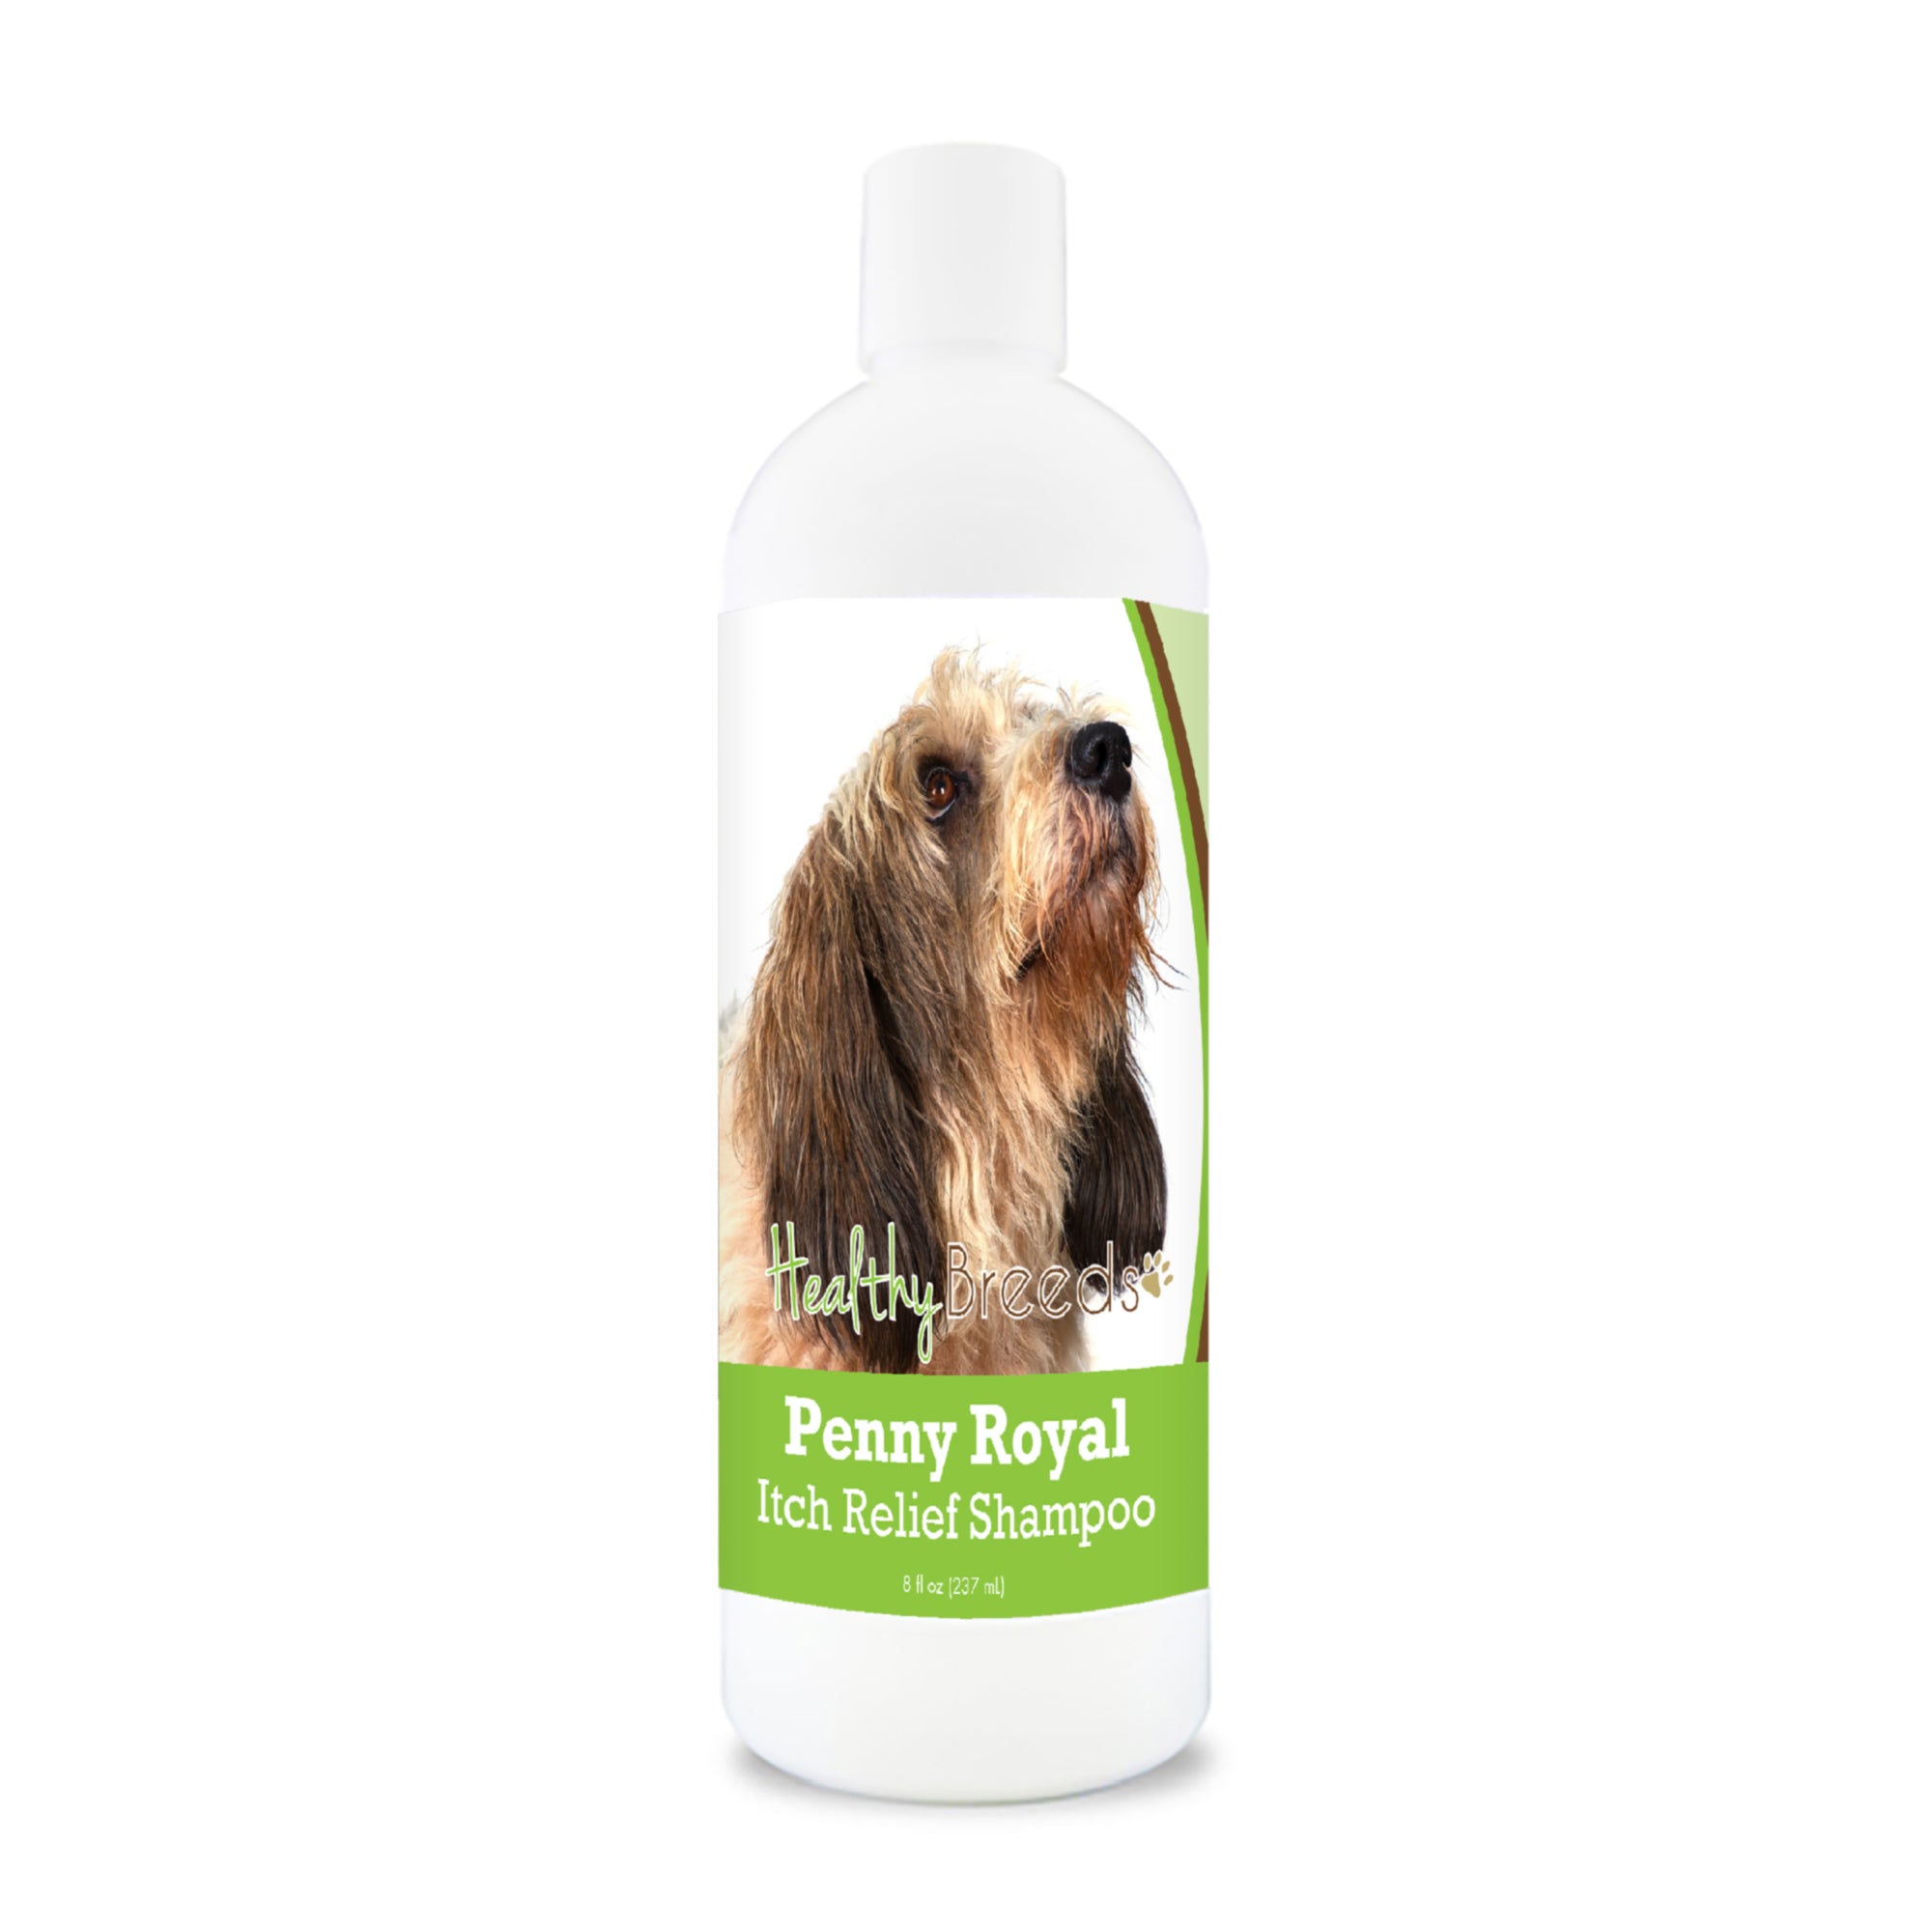 Petits Bassets Griffons Vendeen Penny Royal Itch Relief Shampoo 8 oz